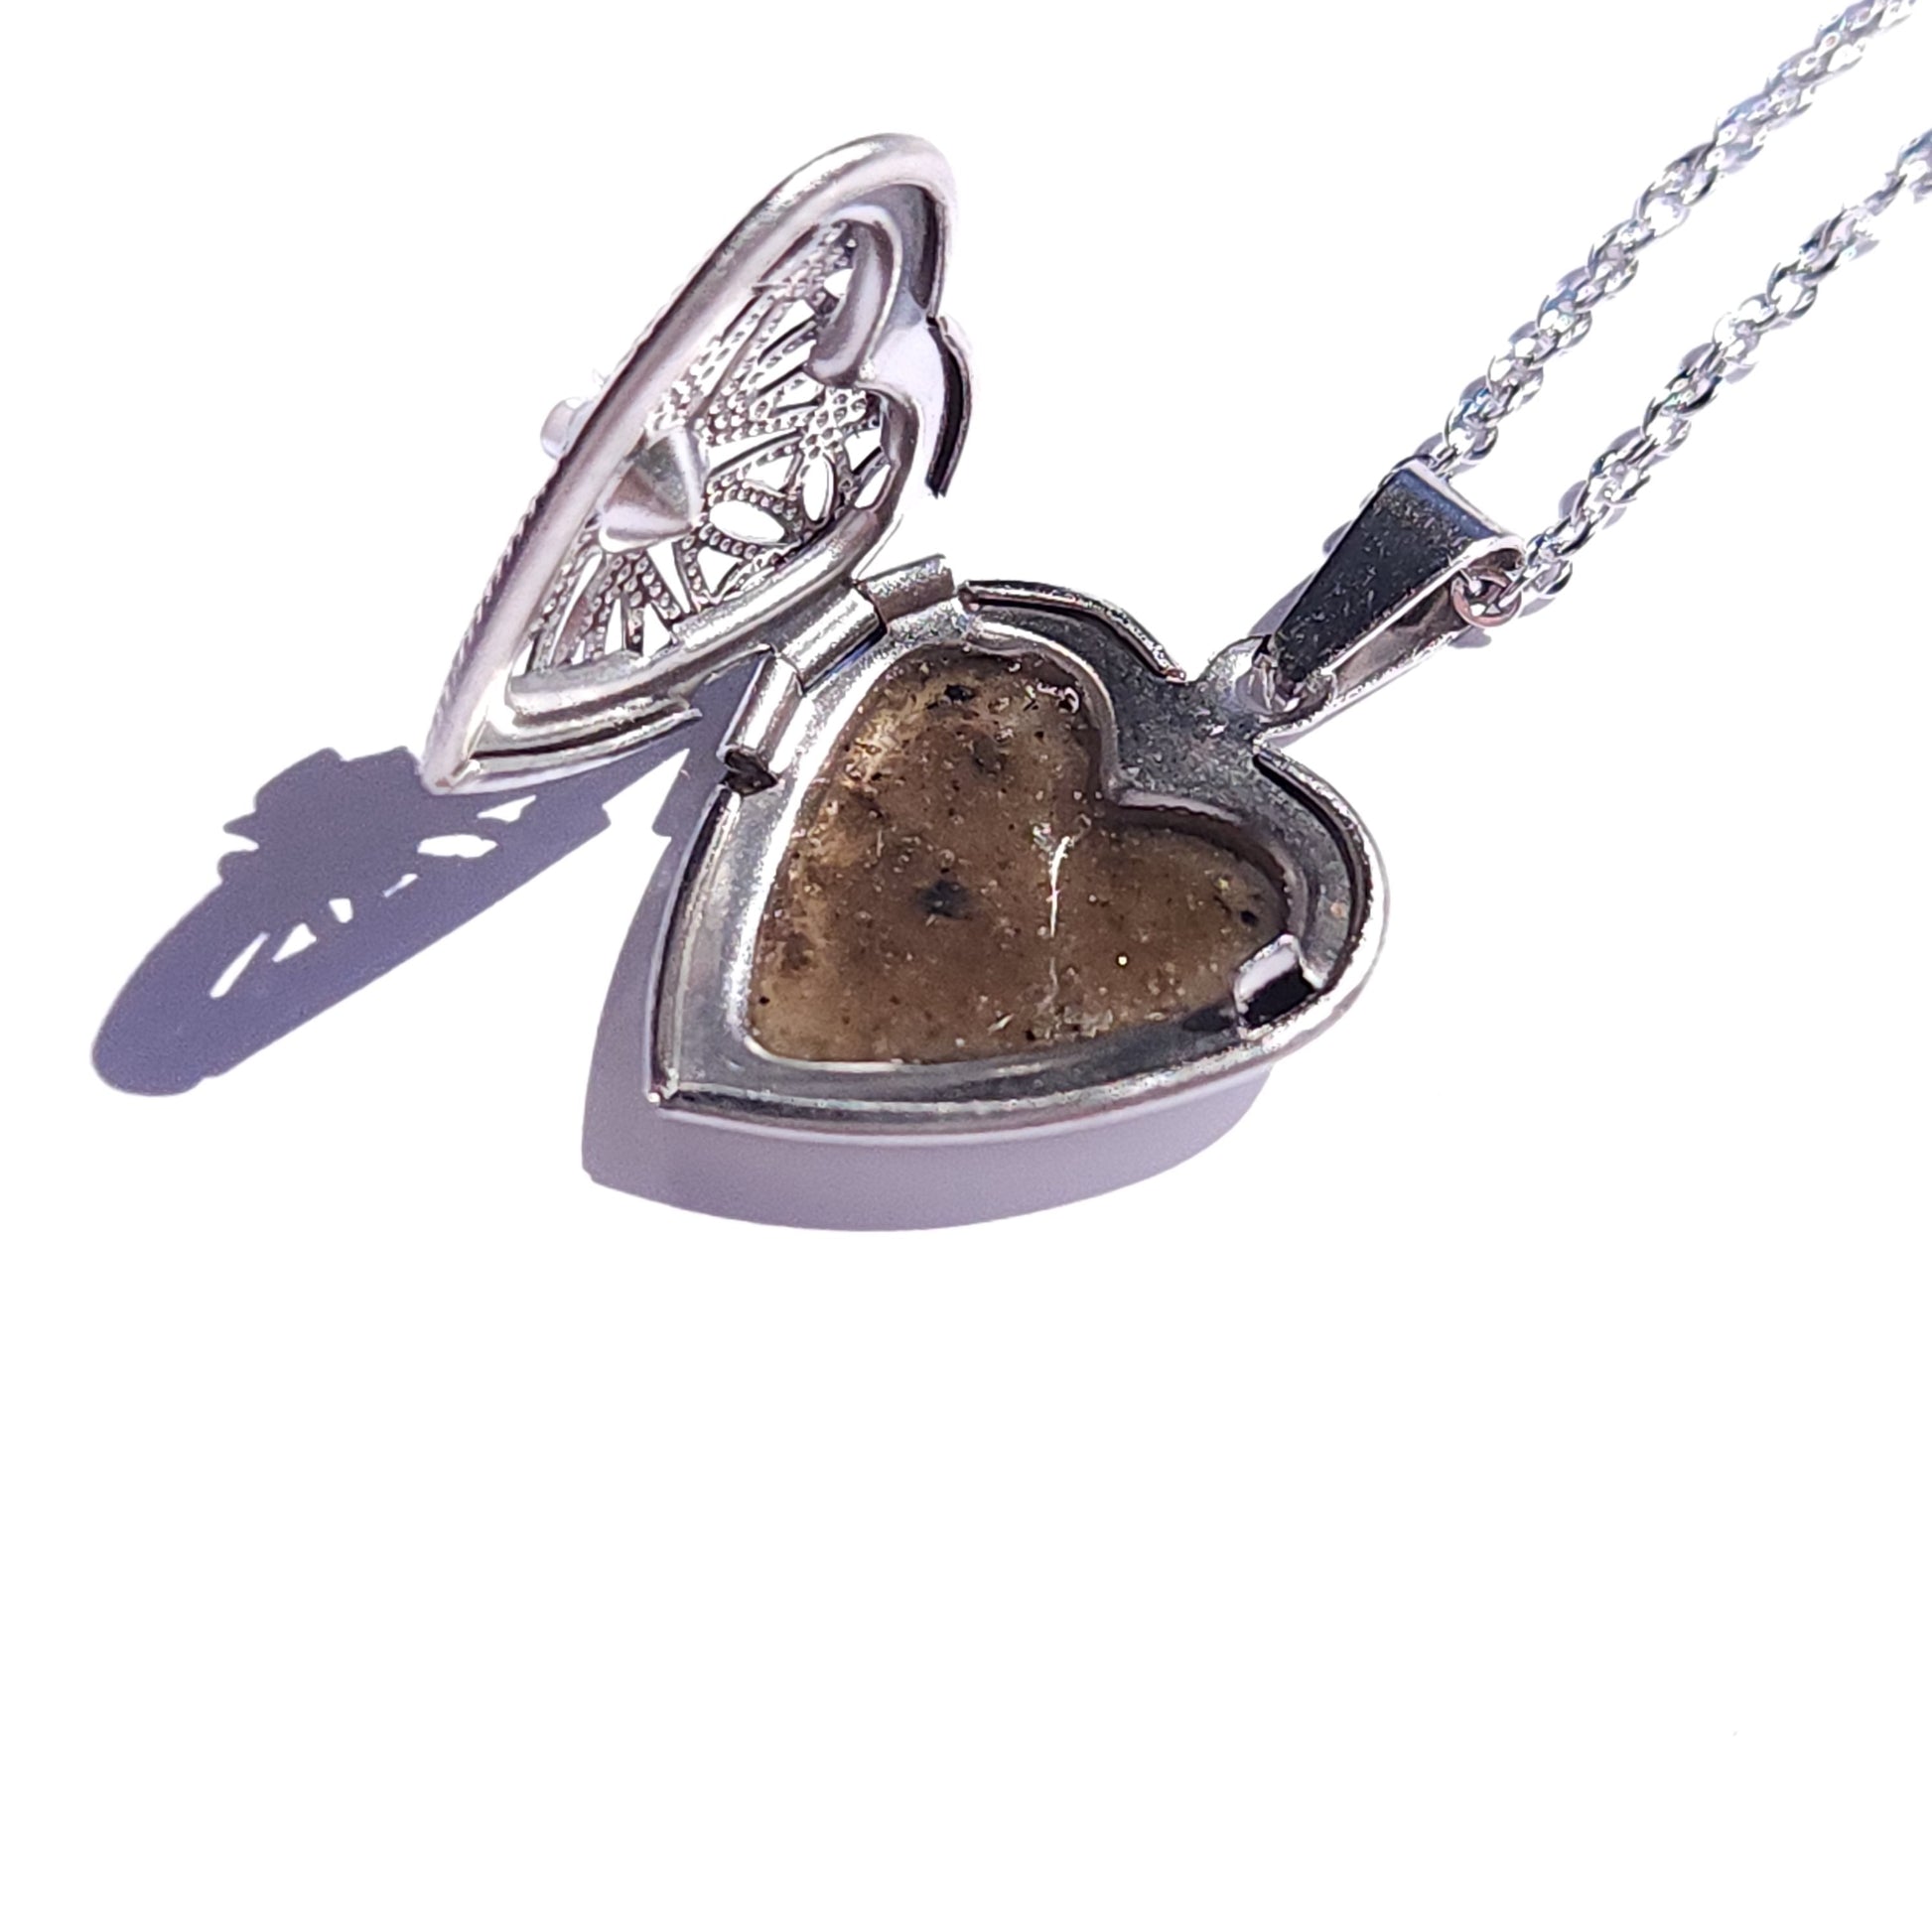 Heart of Remembrance Cremation Pendant - White Rose